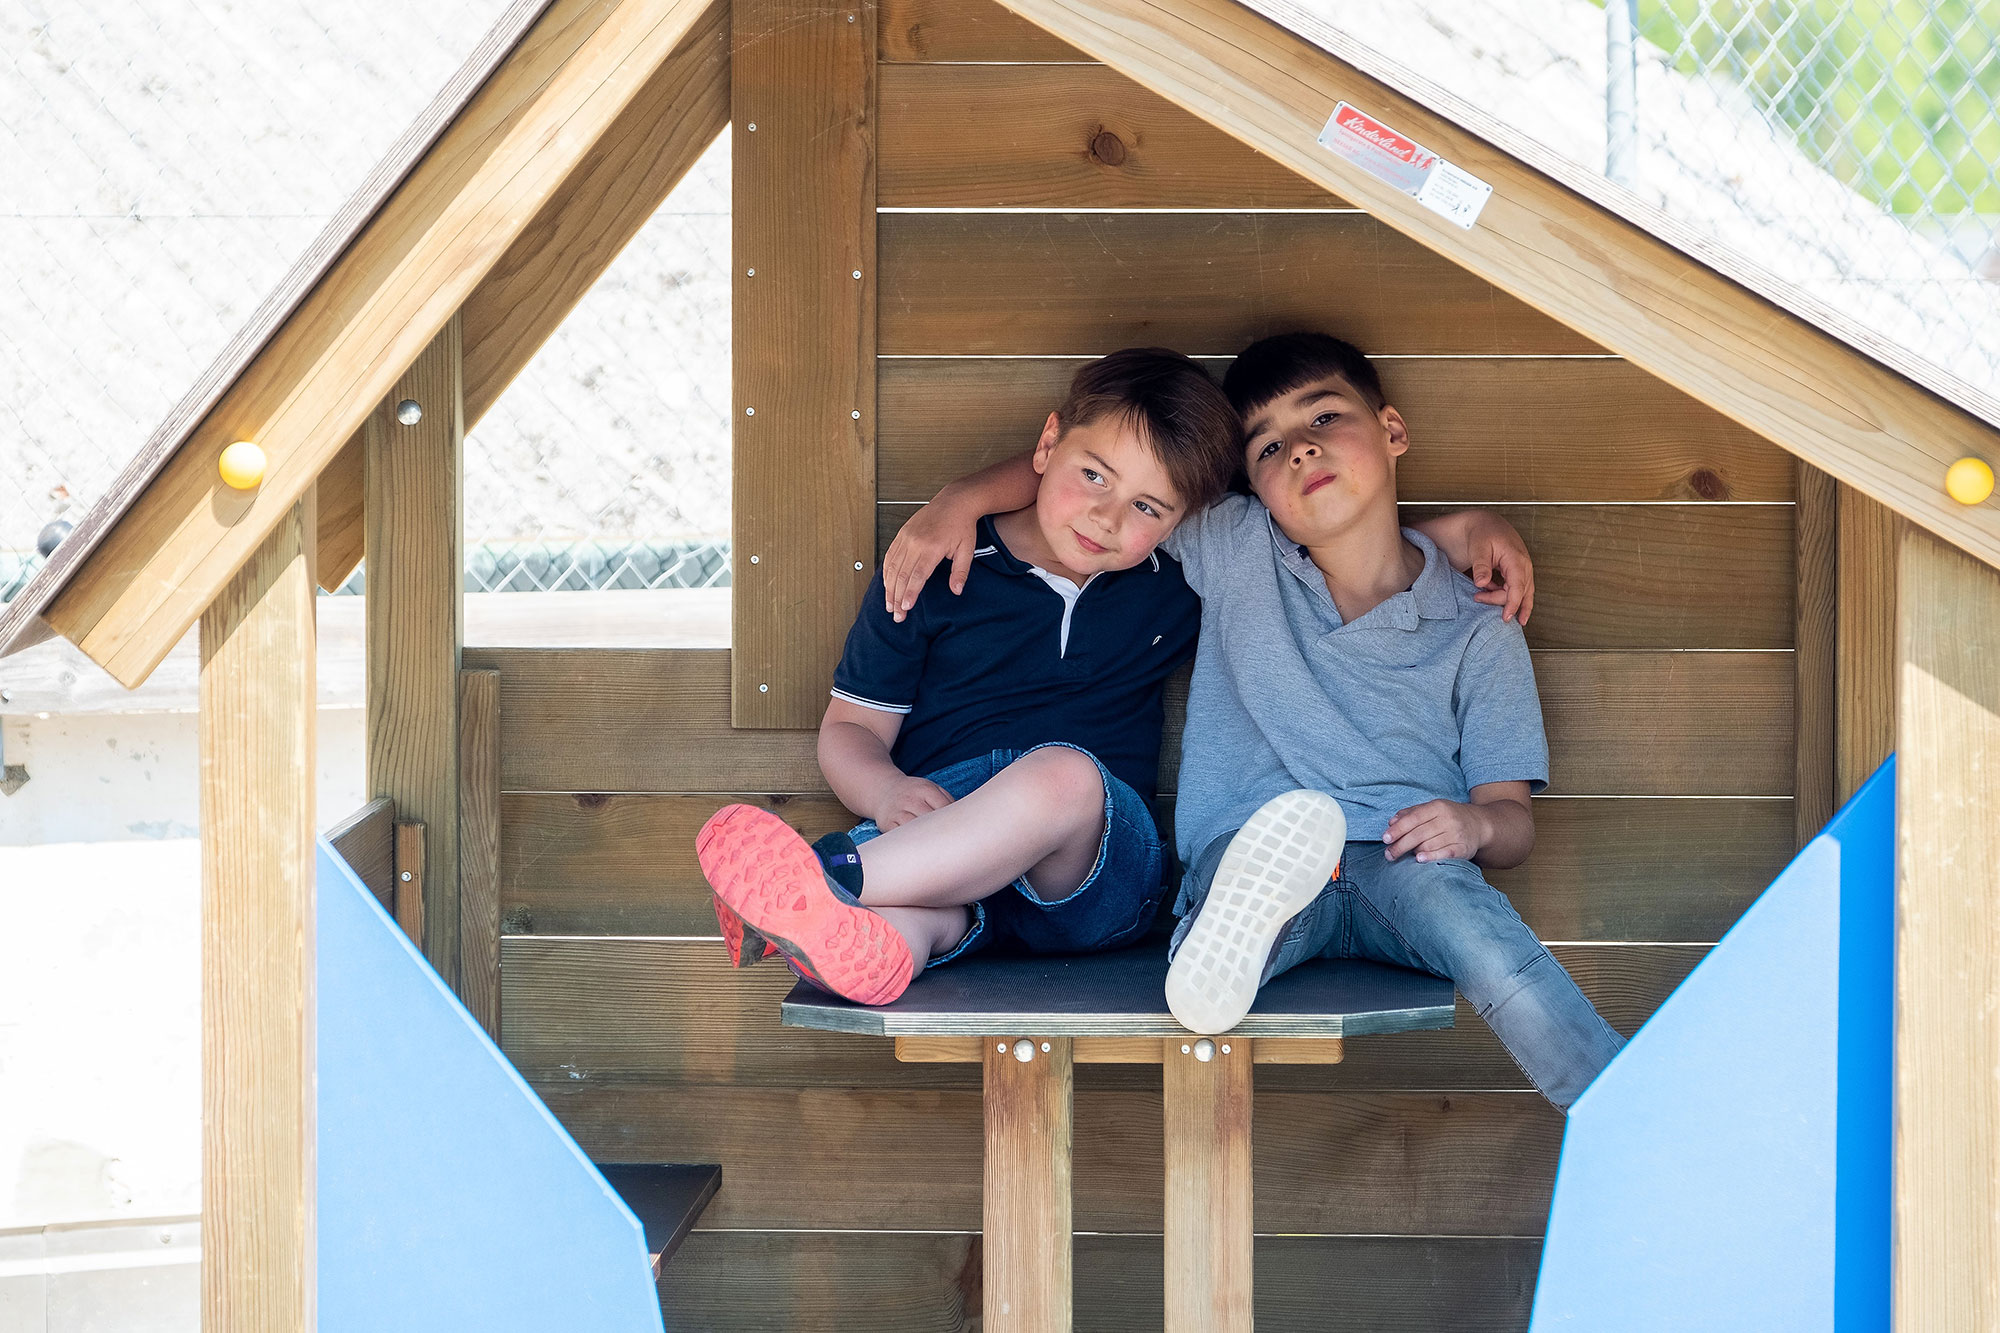 Two boys sit in a wooden house and hug each other.	